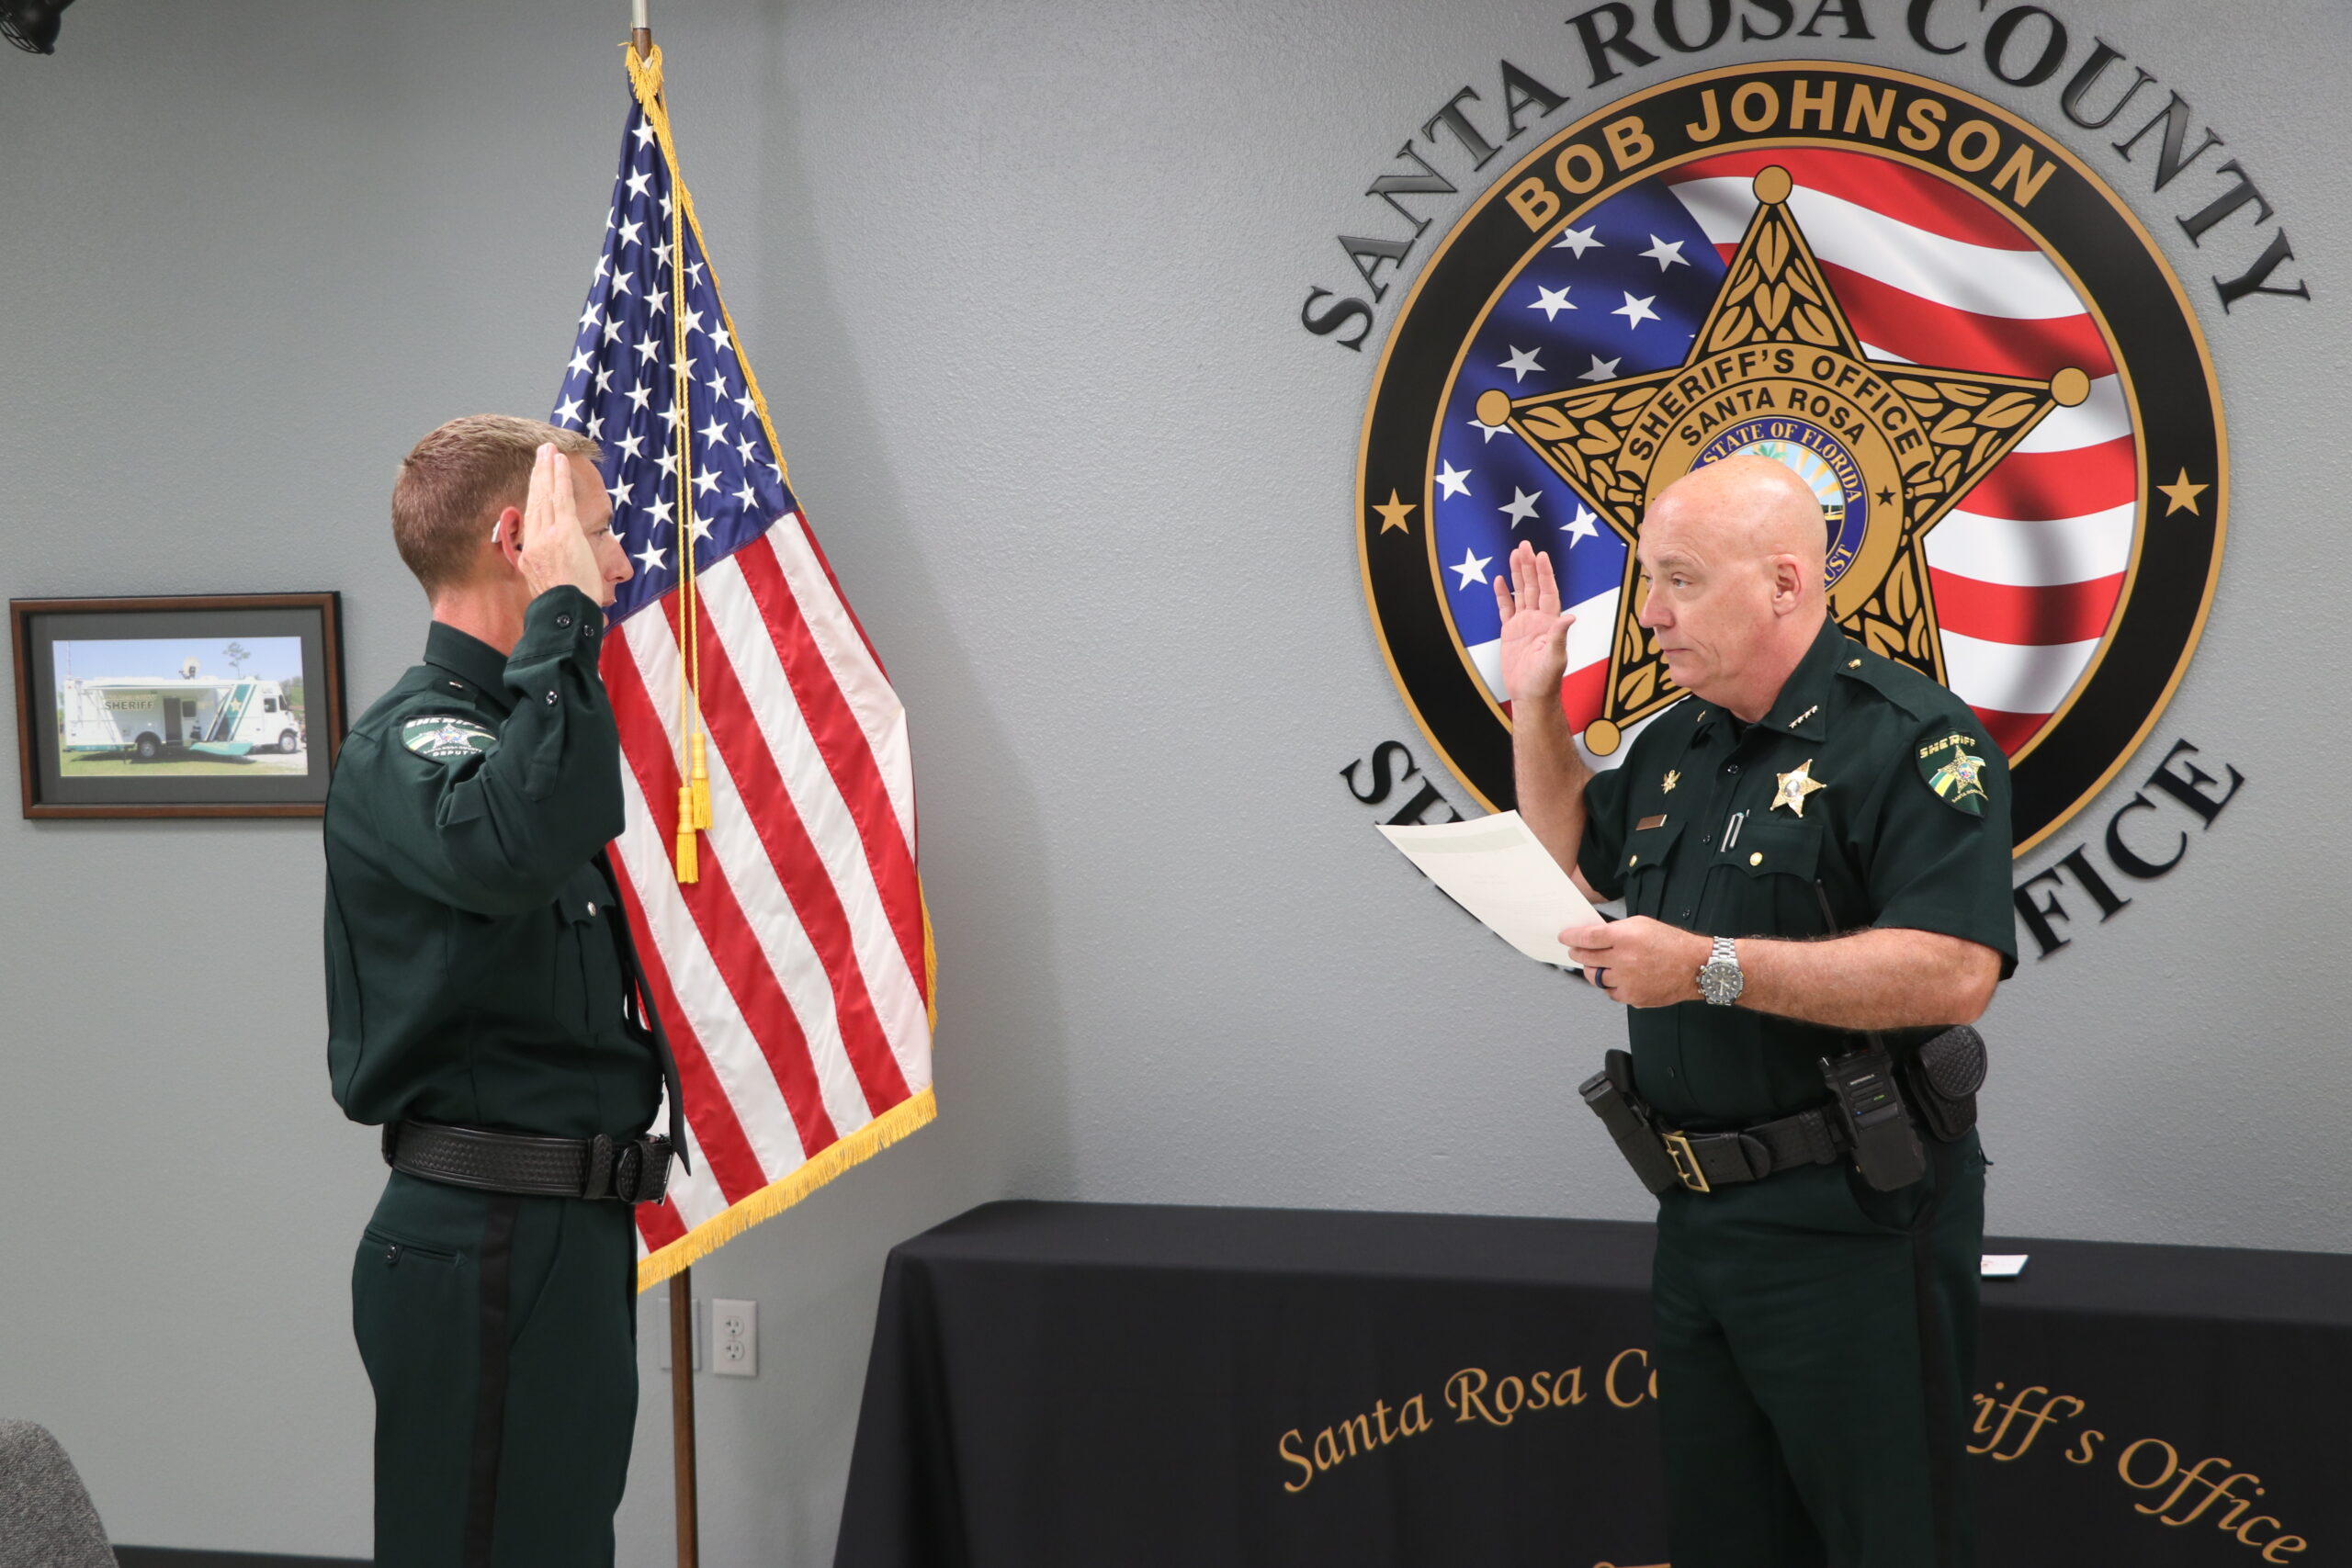 A sheriff's deputy is being sworn in by an officer in a room with american and state flags, and the department's seal visible.